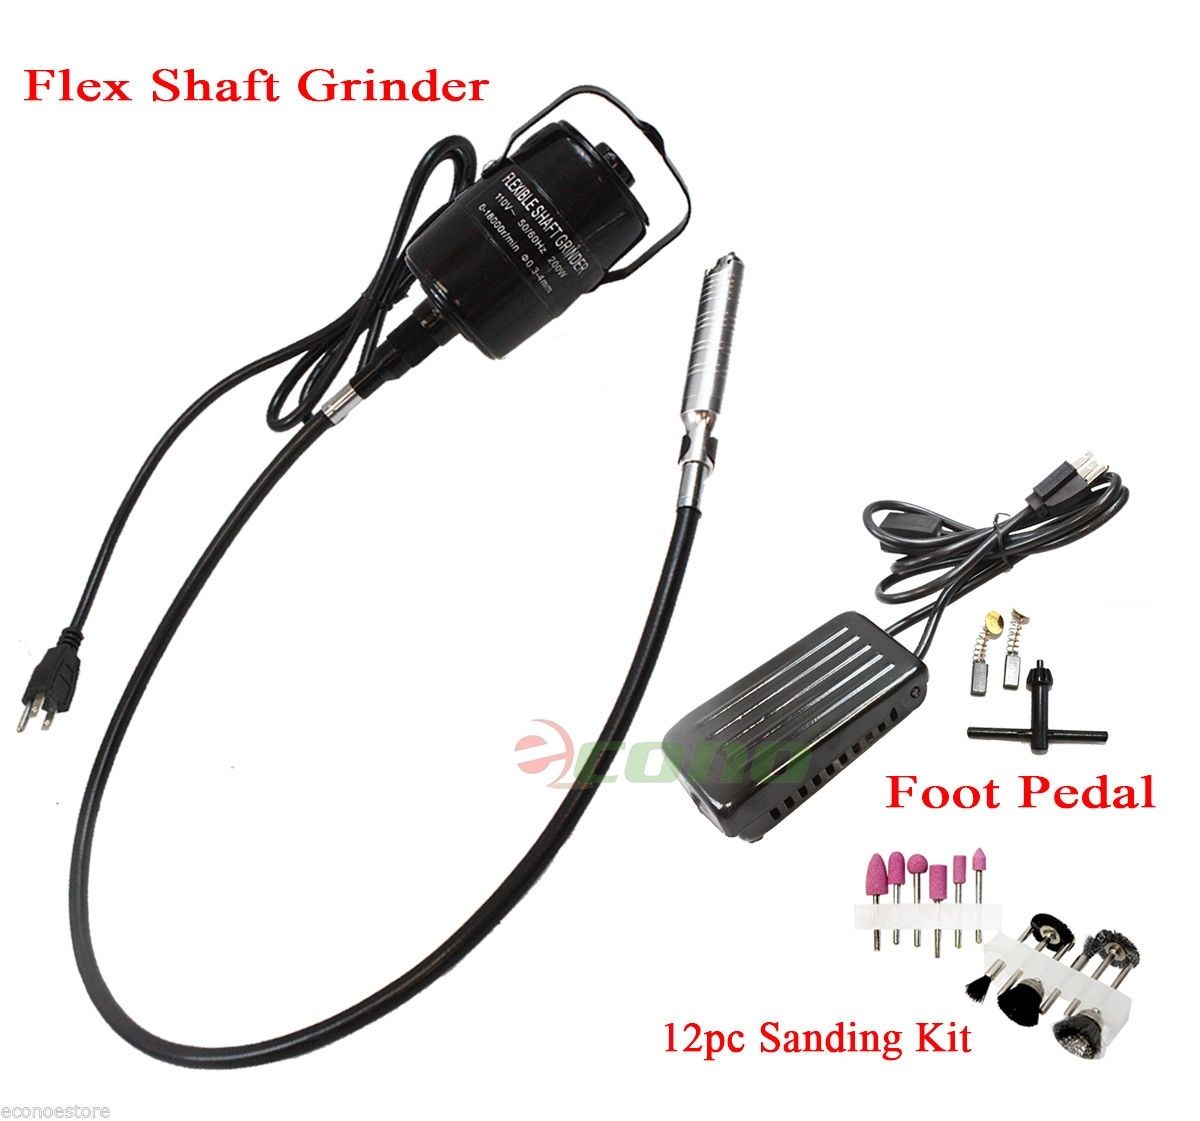 Details about   800W Electric Flexible Shaft Die Grinder Rotary Tool Variable Speed w/ Pedal US 